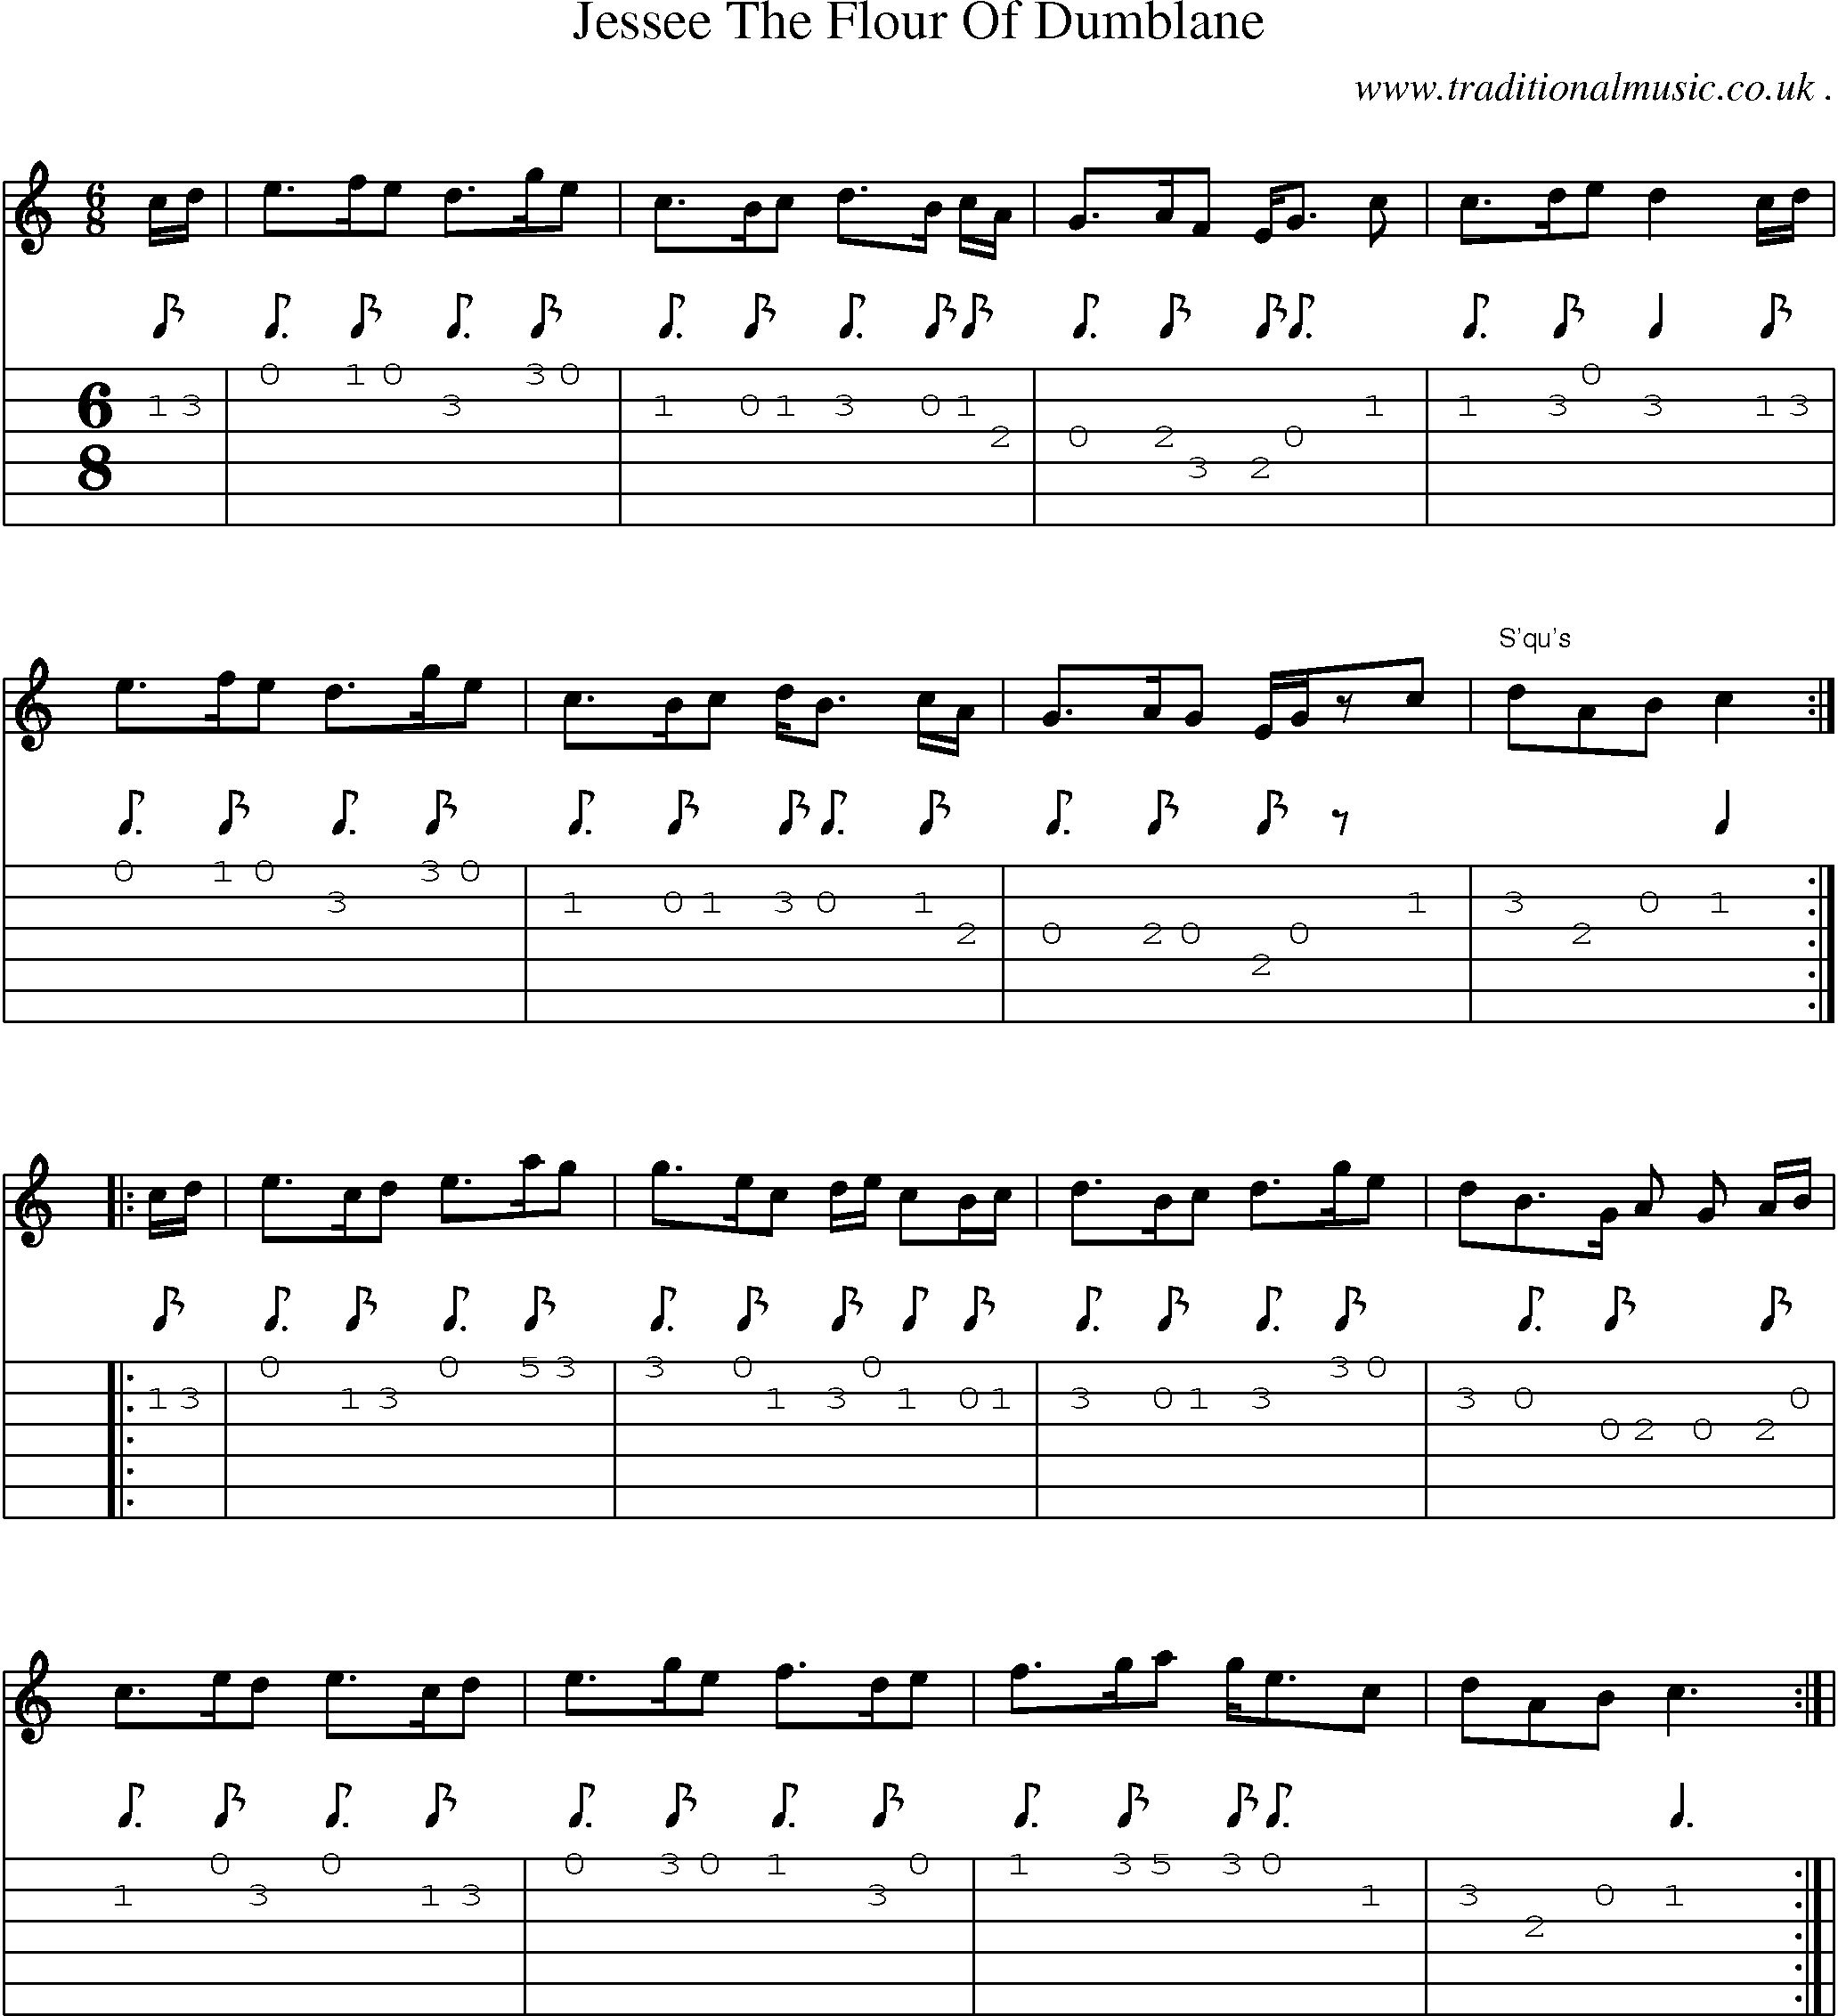 Sheet-Music and Guitar Tabs for Jessee The Flour Of Dumblane